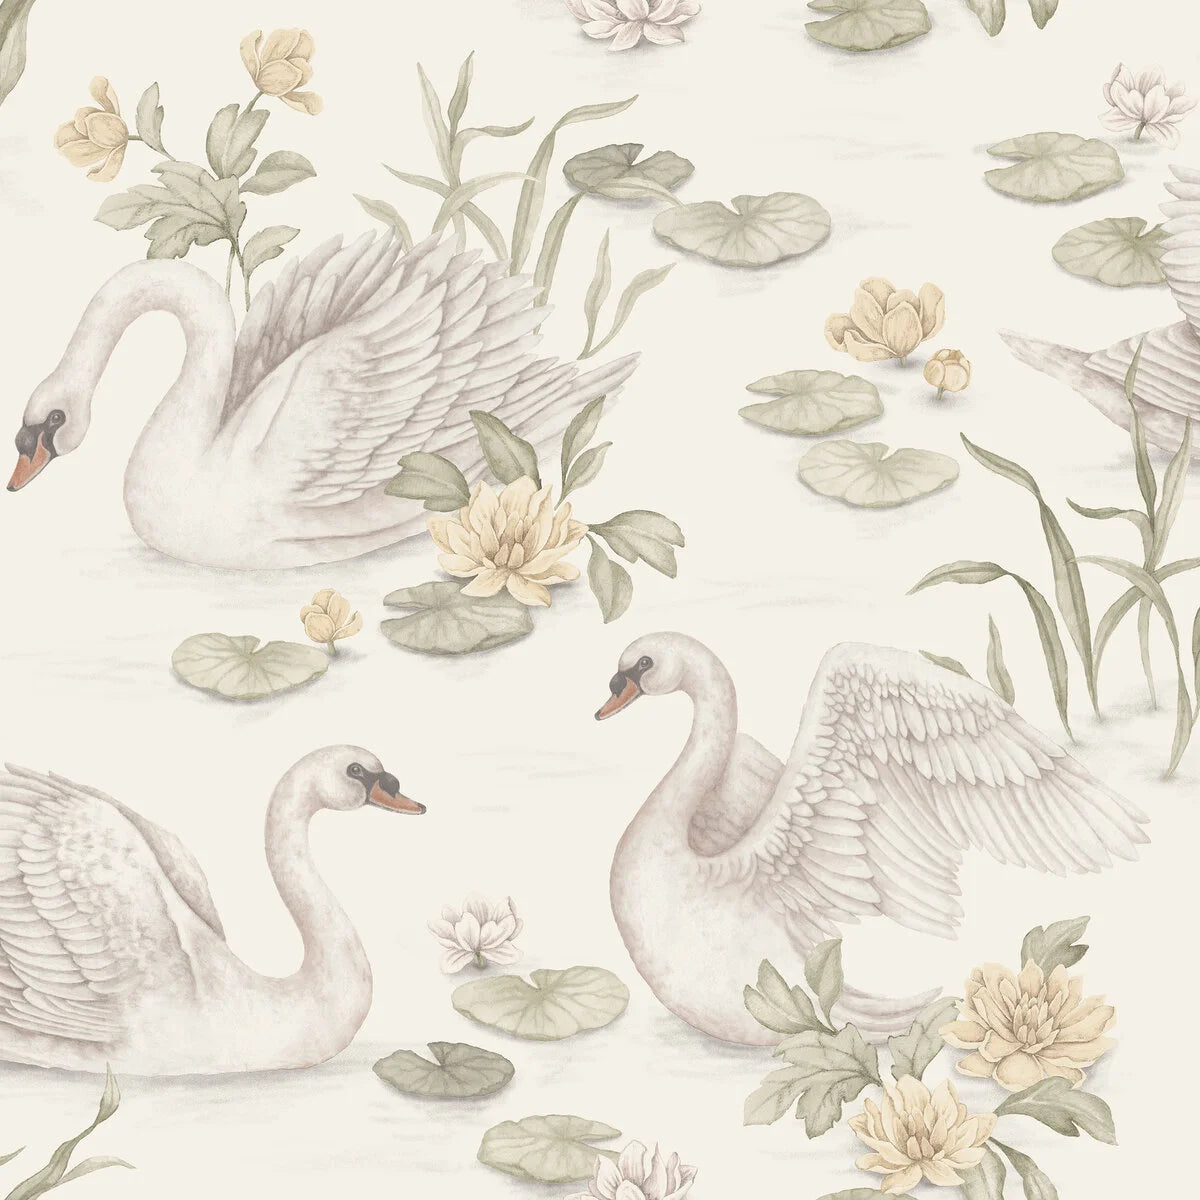 Our Lily Swan children’s wallpaper in light yellow and green tones on a warm white background exudes a gentle and playful vibe. 